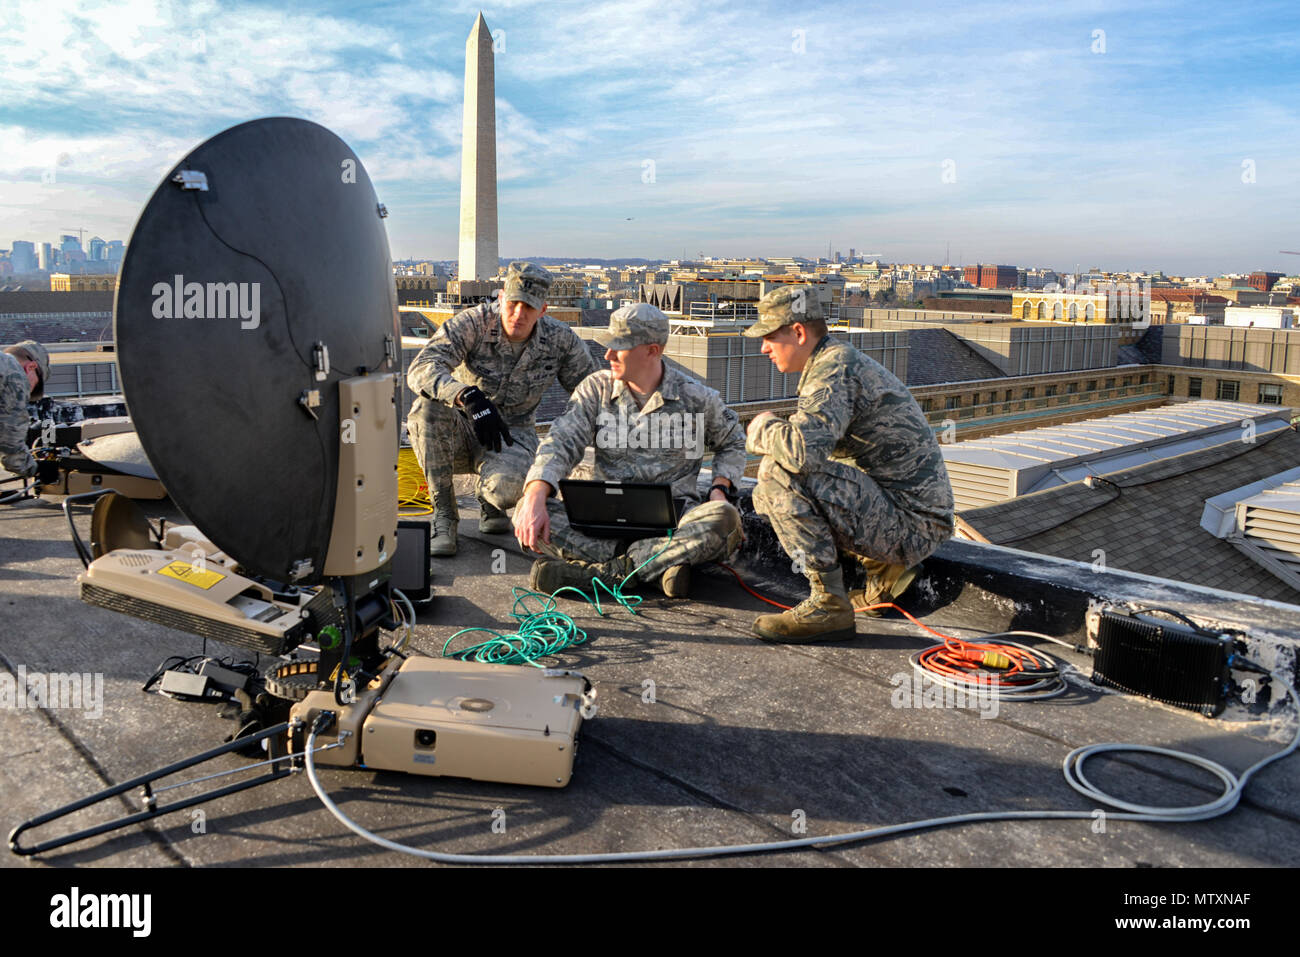 WASHINGTON -Members of the 119th Command and Control Squadron with the Tenn.  National Guard, set up a parabolic dish on a downtown rooftop to provide  satellite communications between supported agencies during the